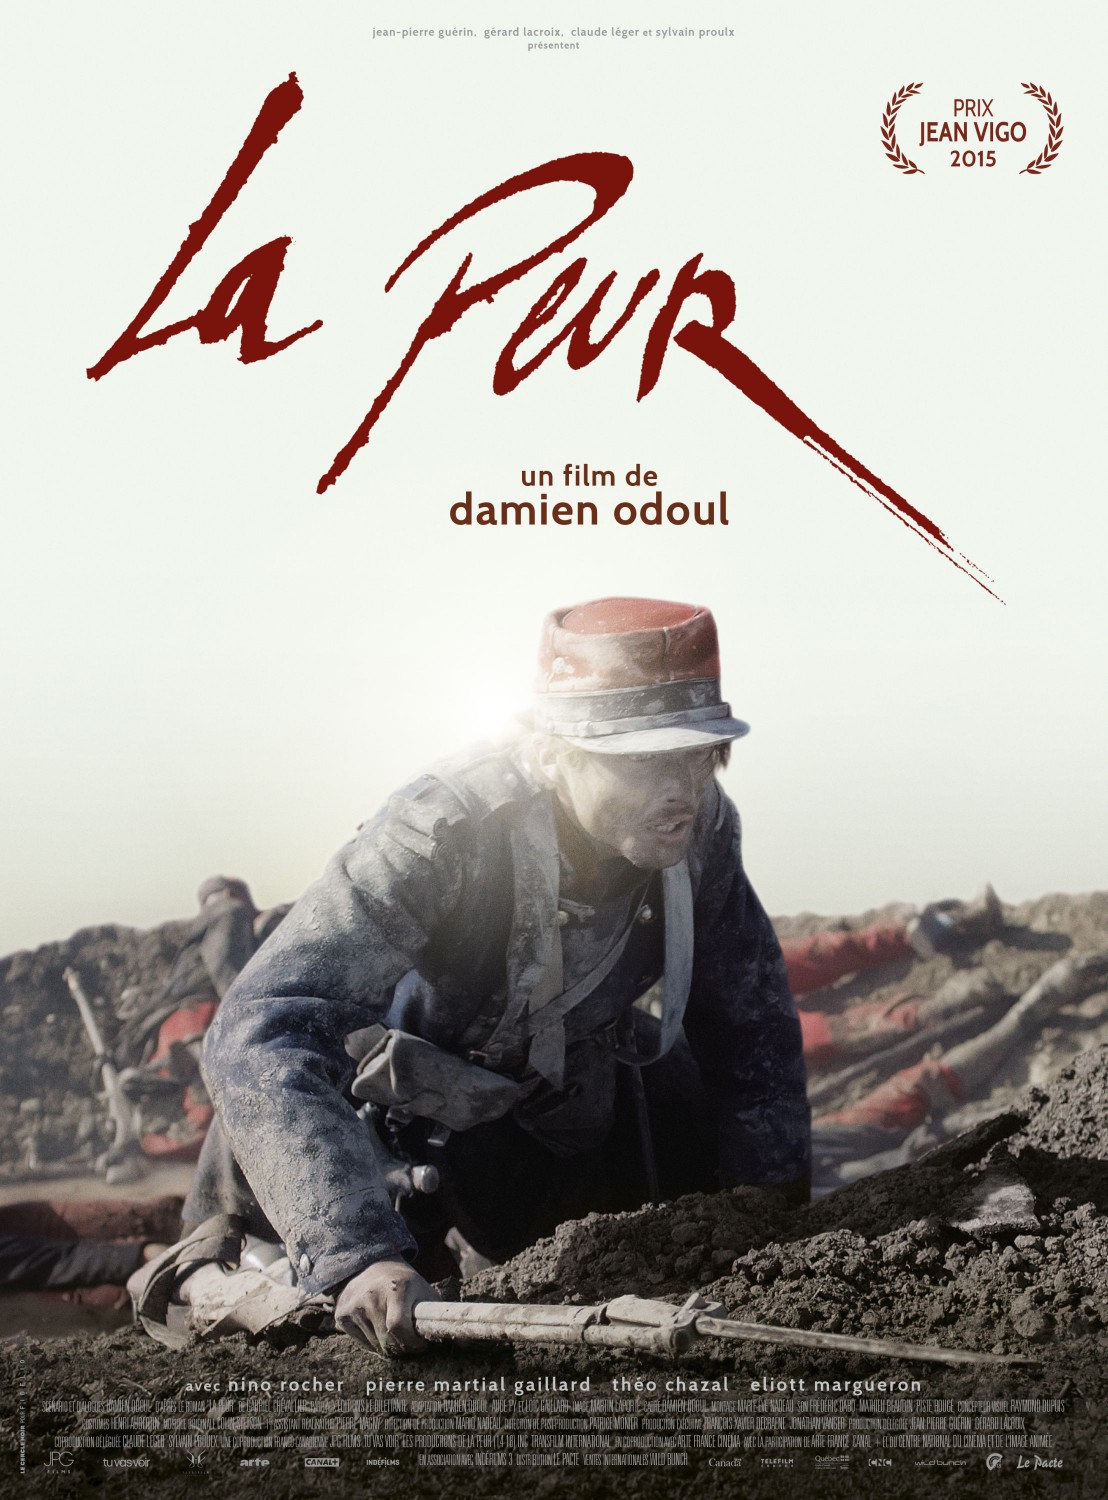 Extra Large Movie Poster Image for La peur 